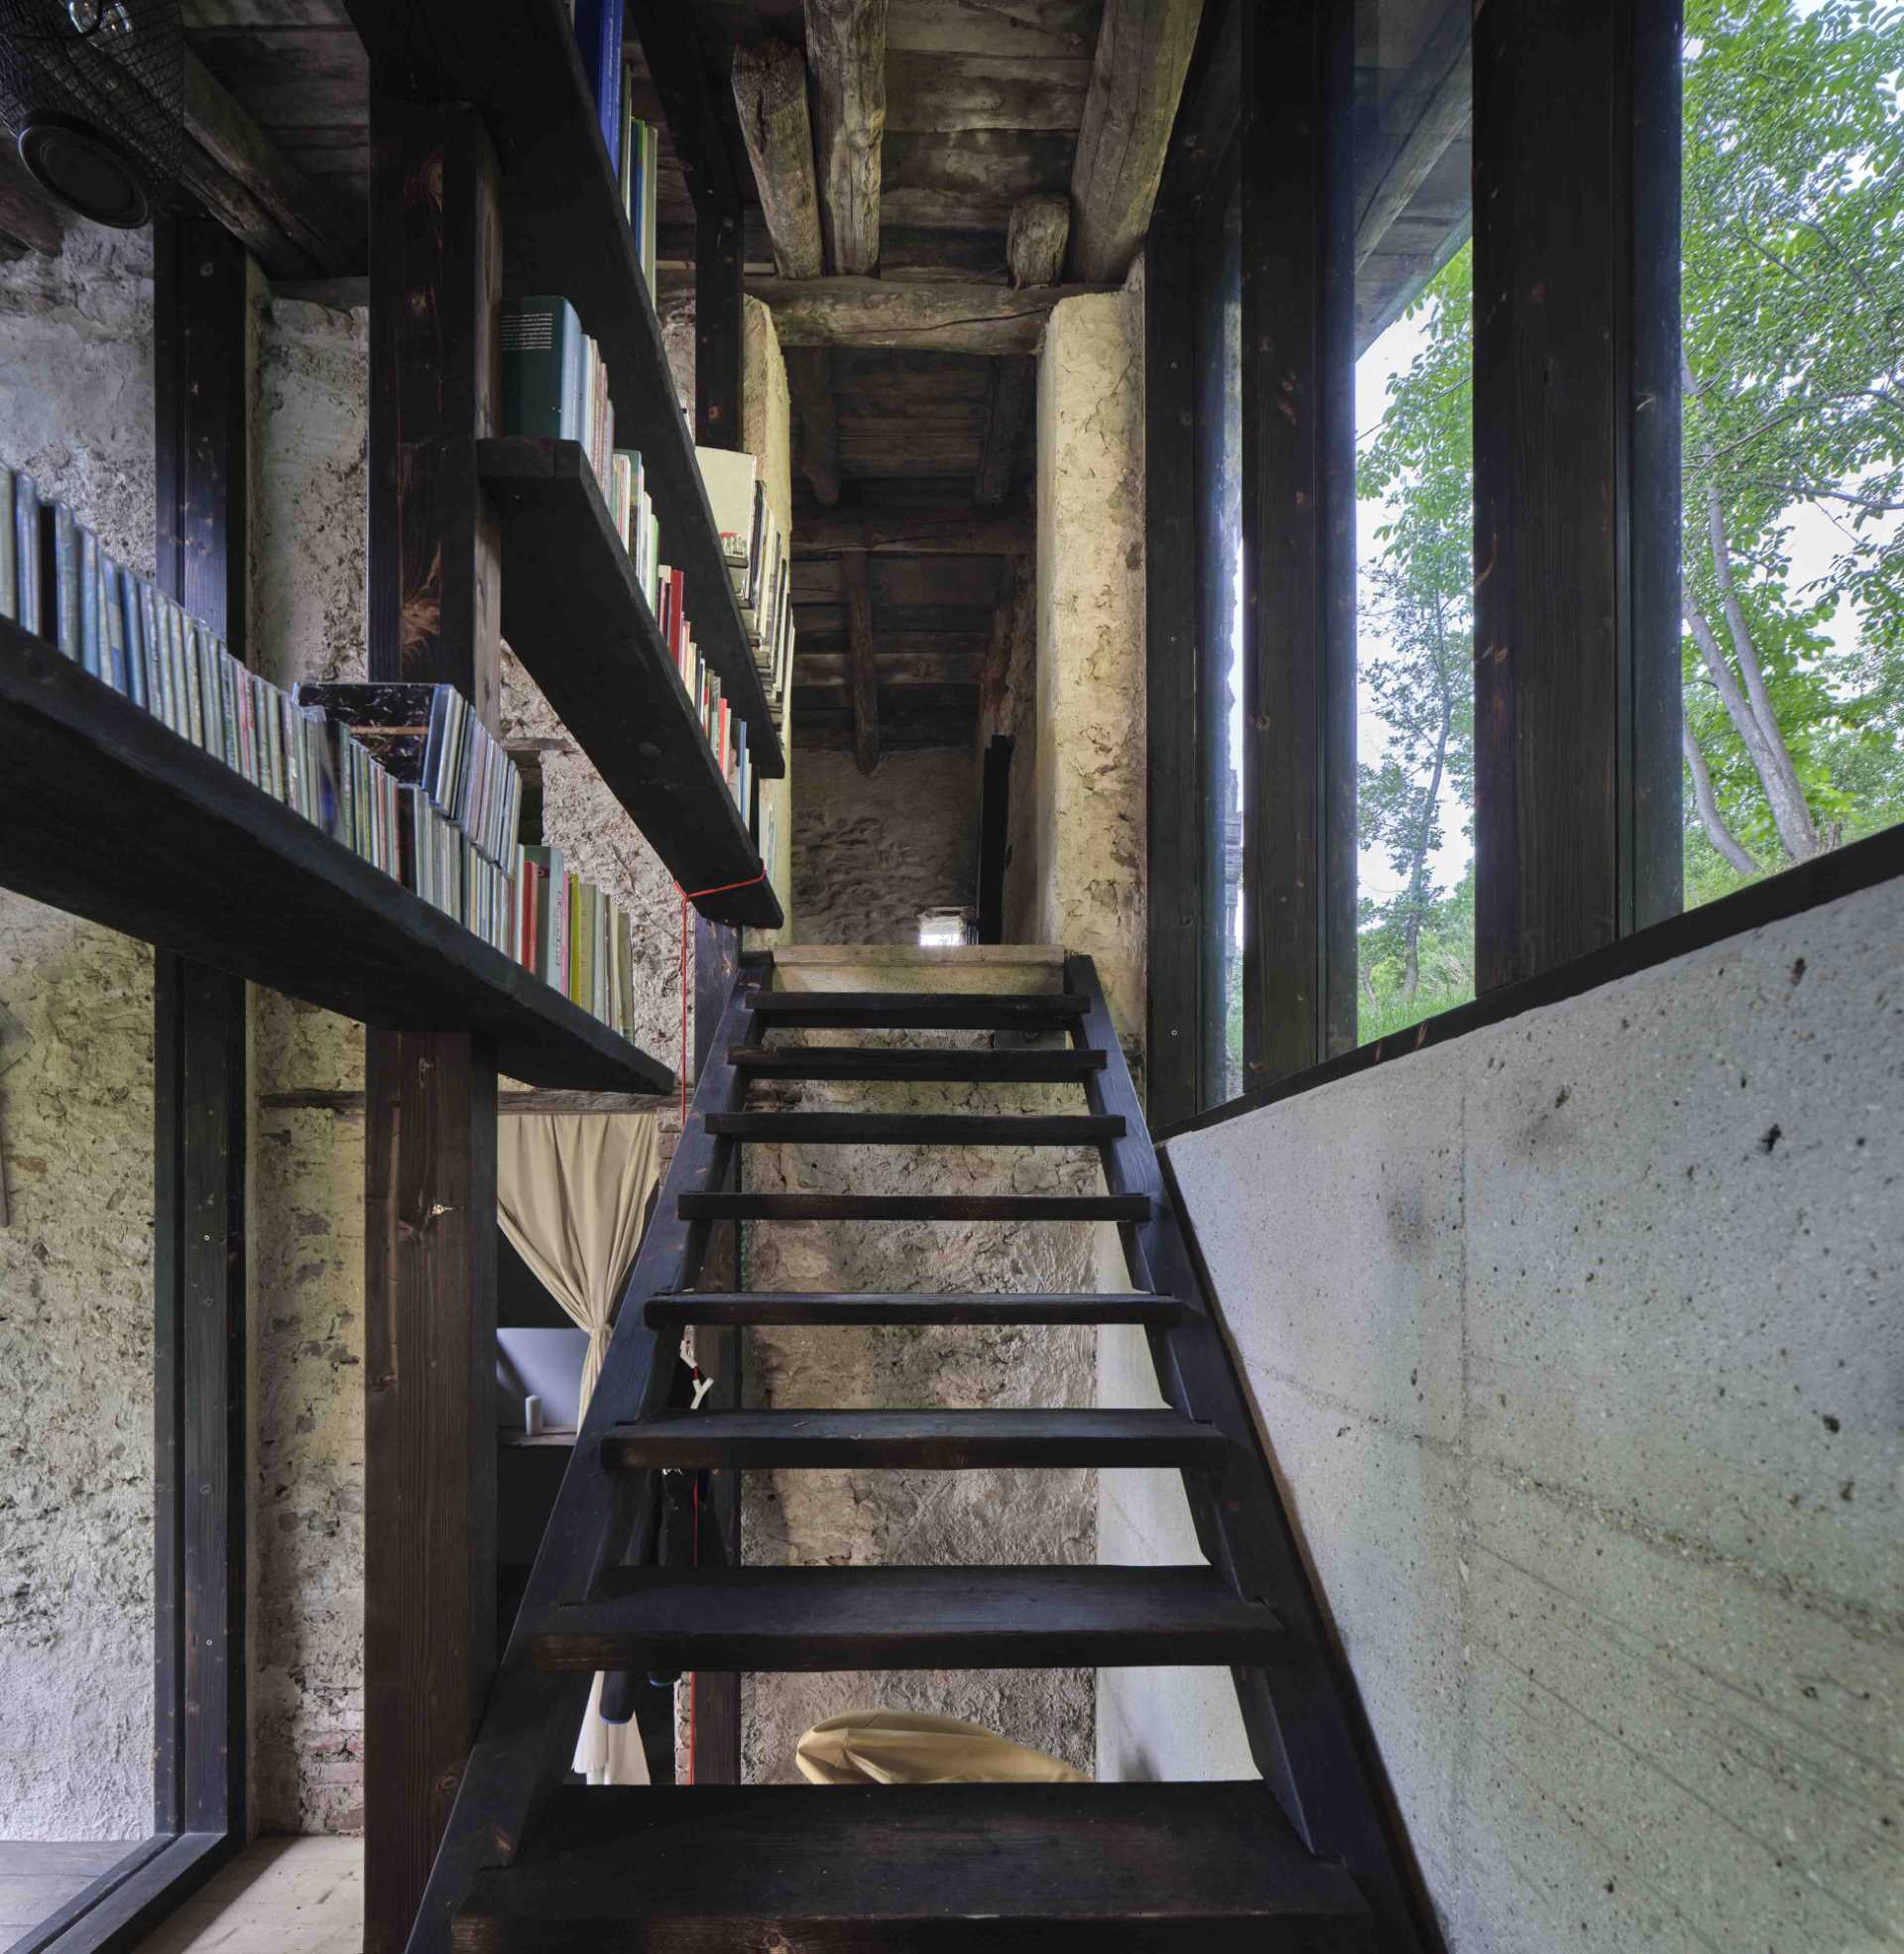 The connection to the pre-existing structure is made through an internal wooden staircase, located in the reconstructed and isolated old portico.